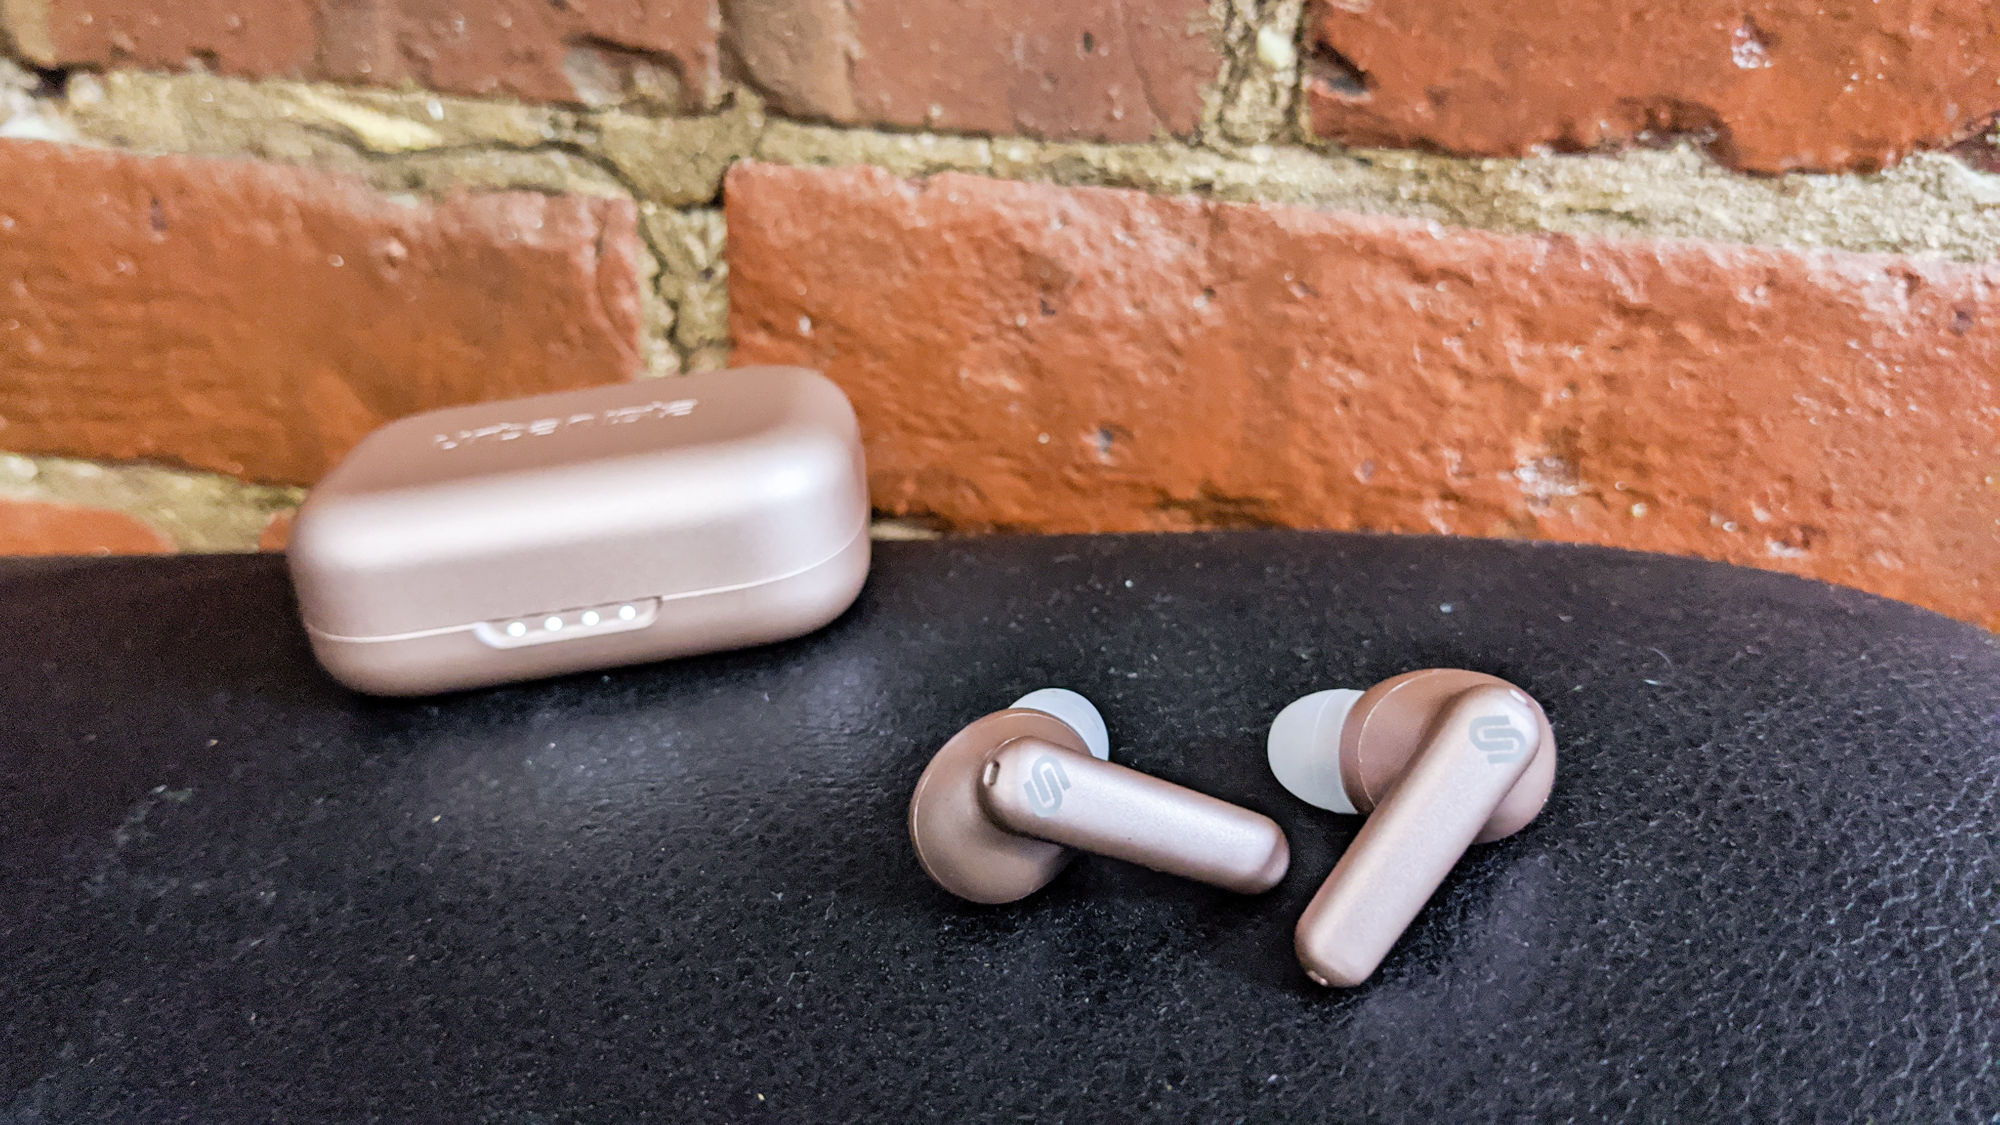 Urbanista London wireless | Mag Laptop review earbuds